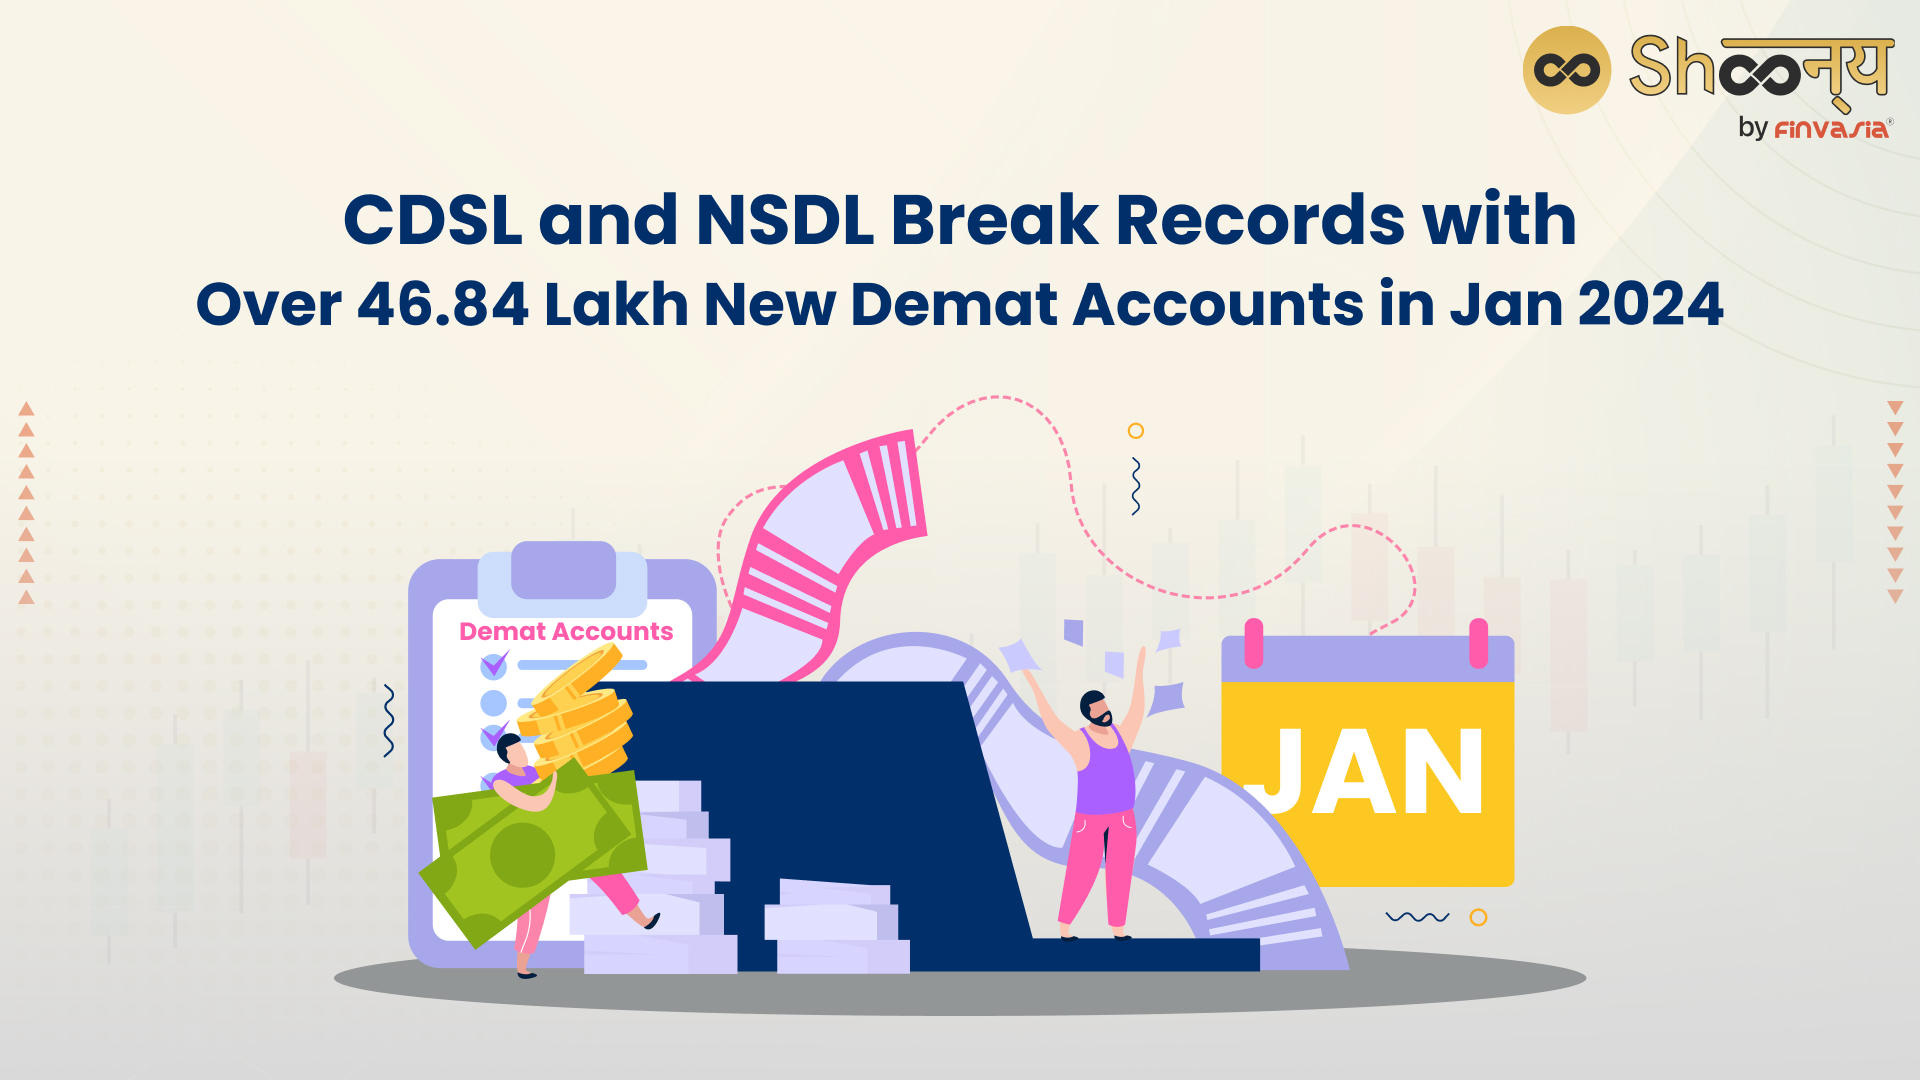 CDSL and NSDL Break Records with Over 46.84 Lakh New Demat Accounts in Jan 2024